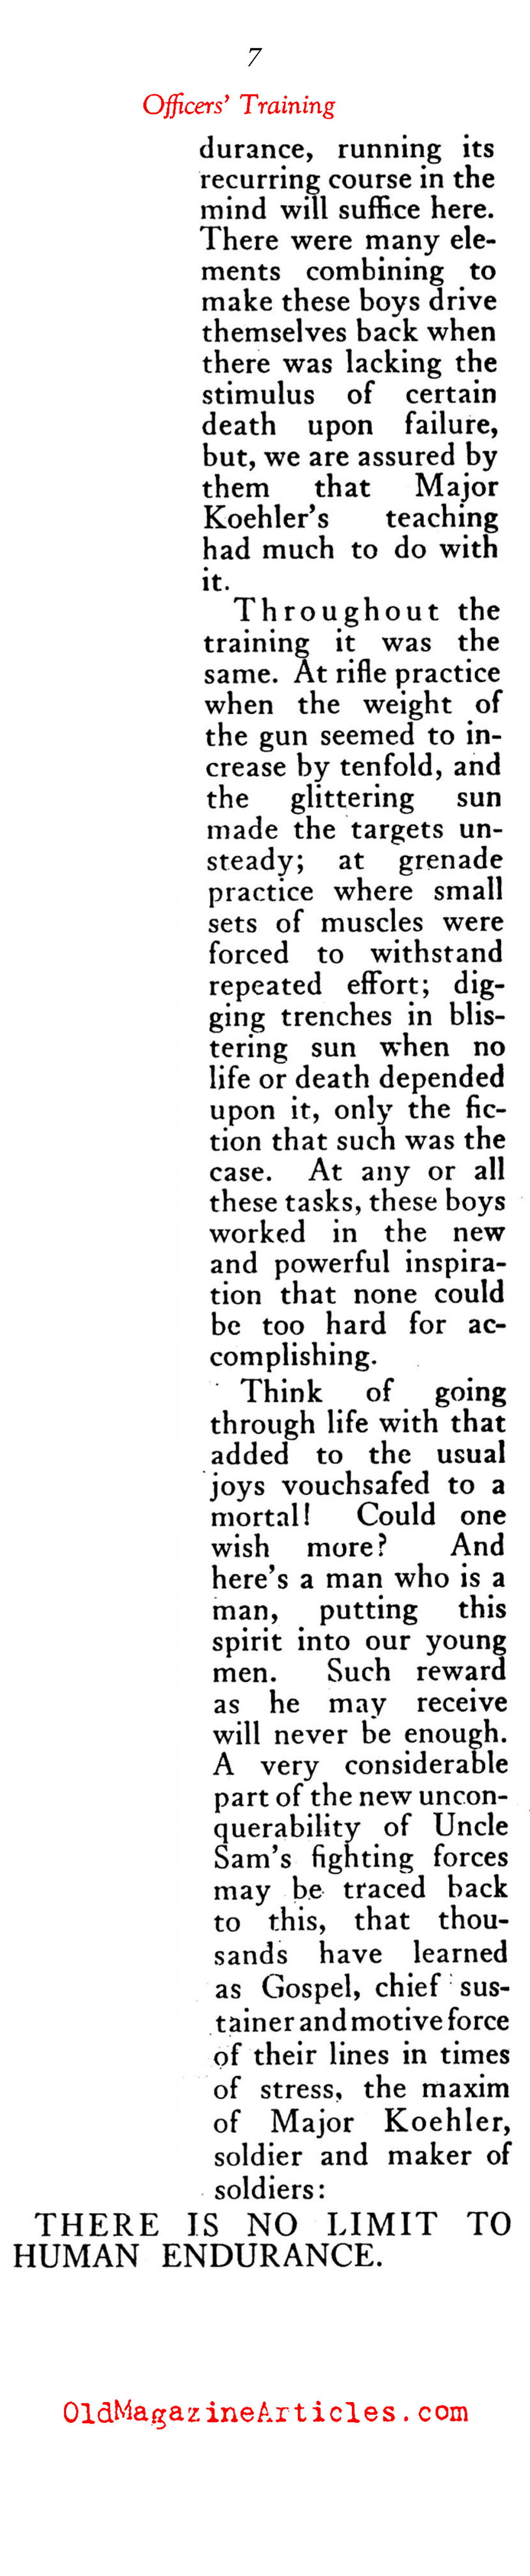 The Power of Positive Thought in Military Training (Outing Magazine, 1918)